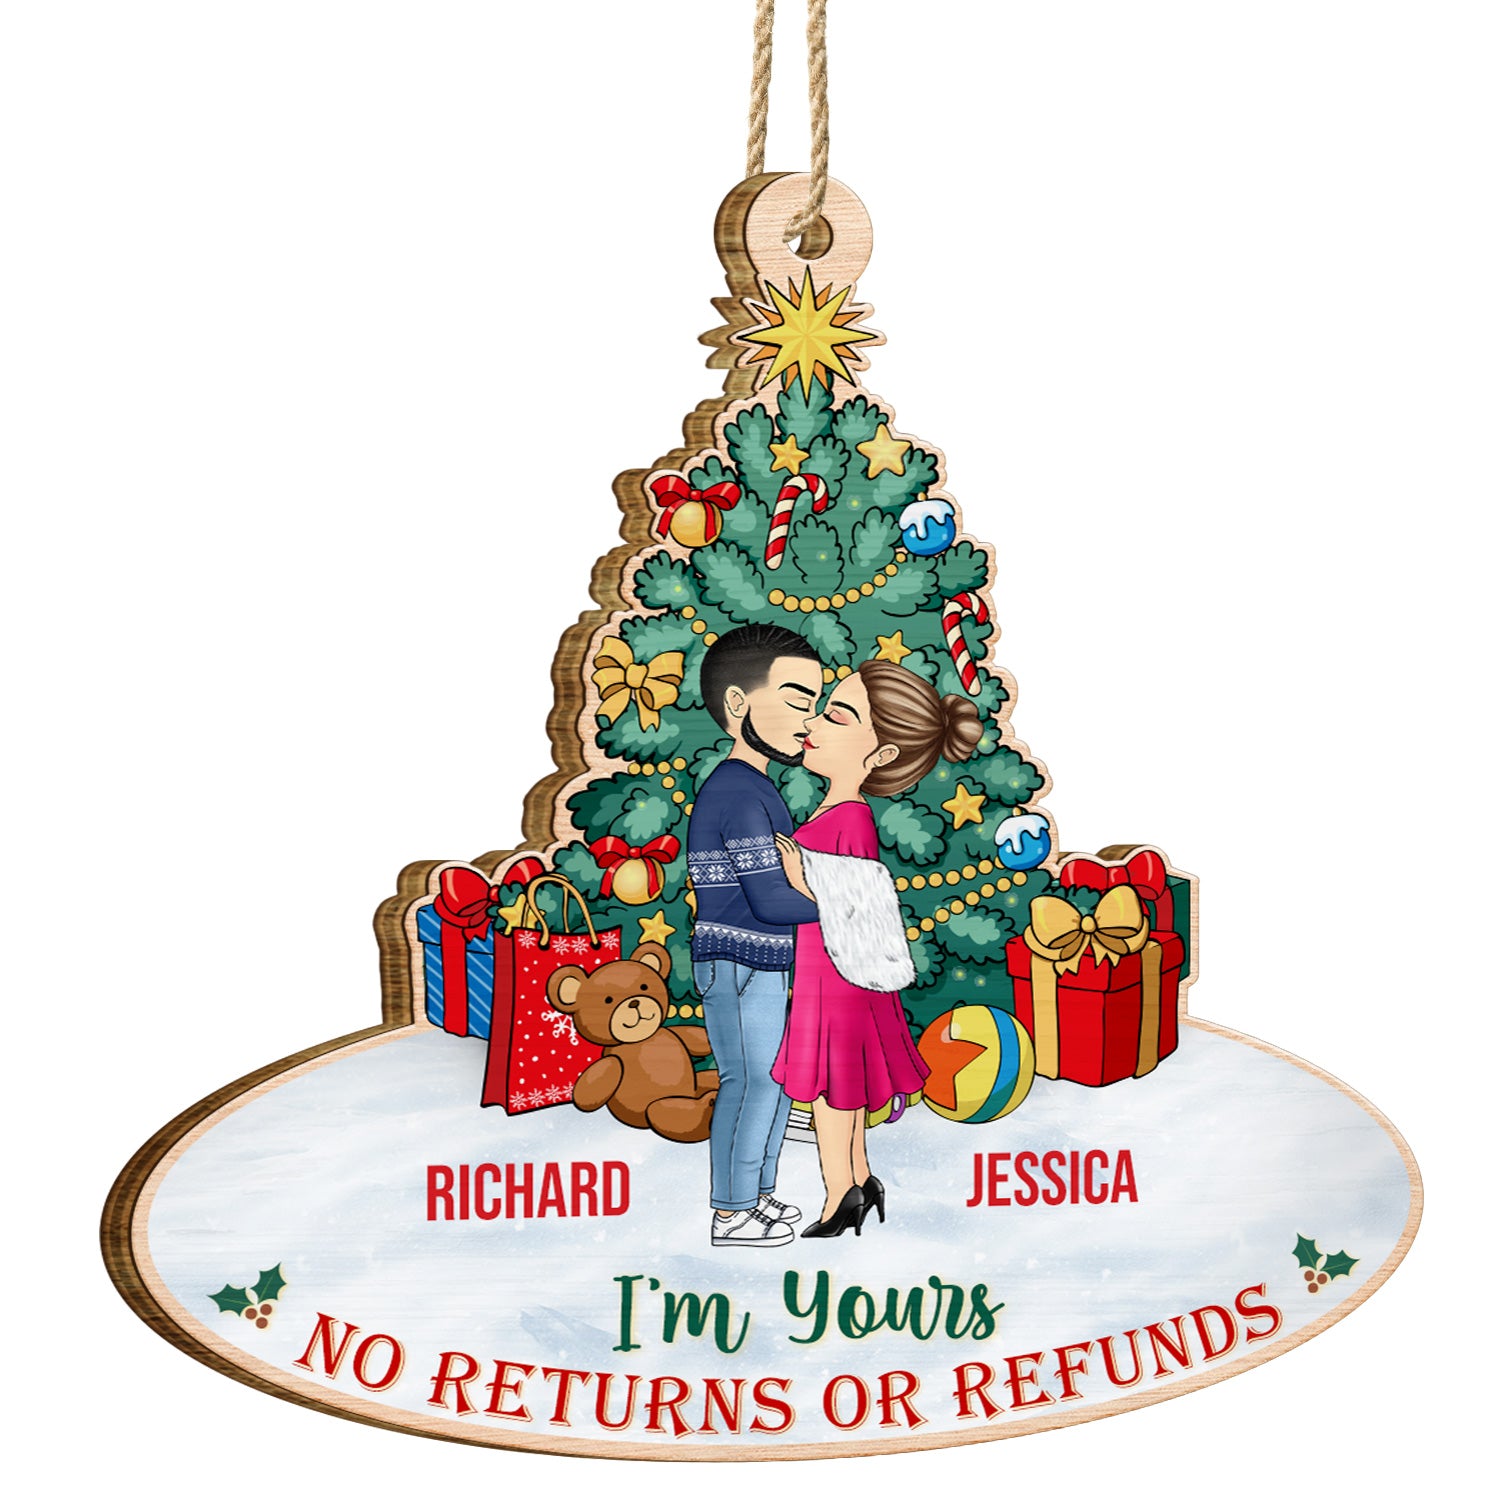 Annoying Each Other No Returns Or Refunds - Christmas Gift For Couples - Personalized Custom Shaped Wooden Ornament